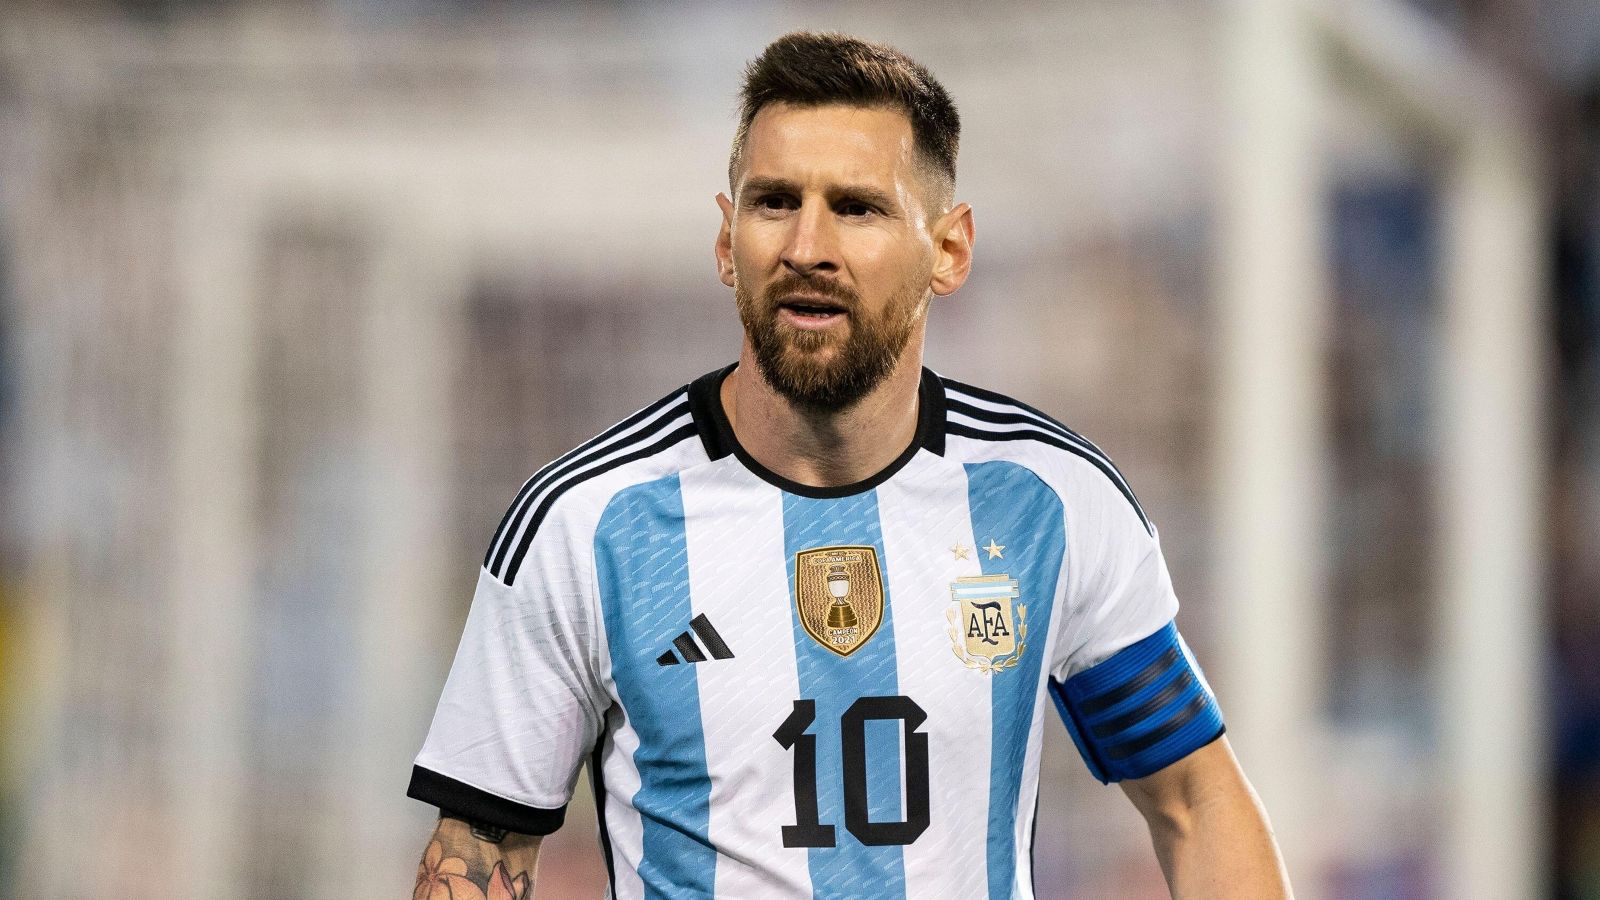 Messi thinks he has nothing to apologize for in the situation with the Mexican national team jersey